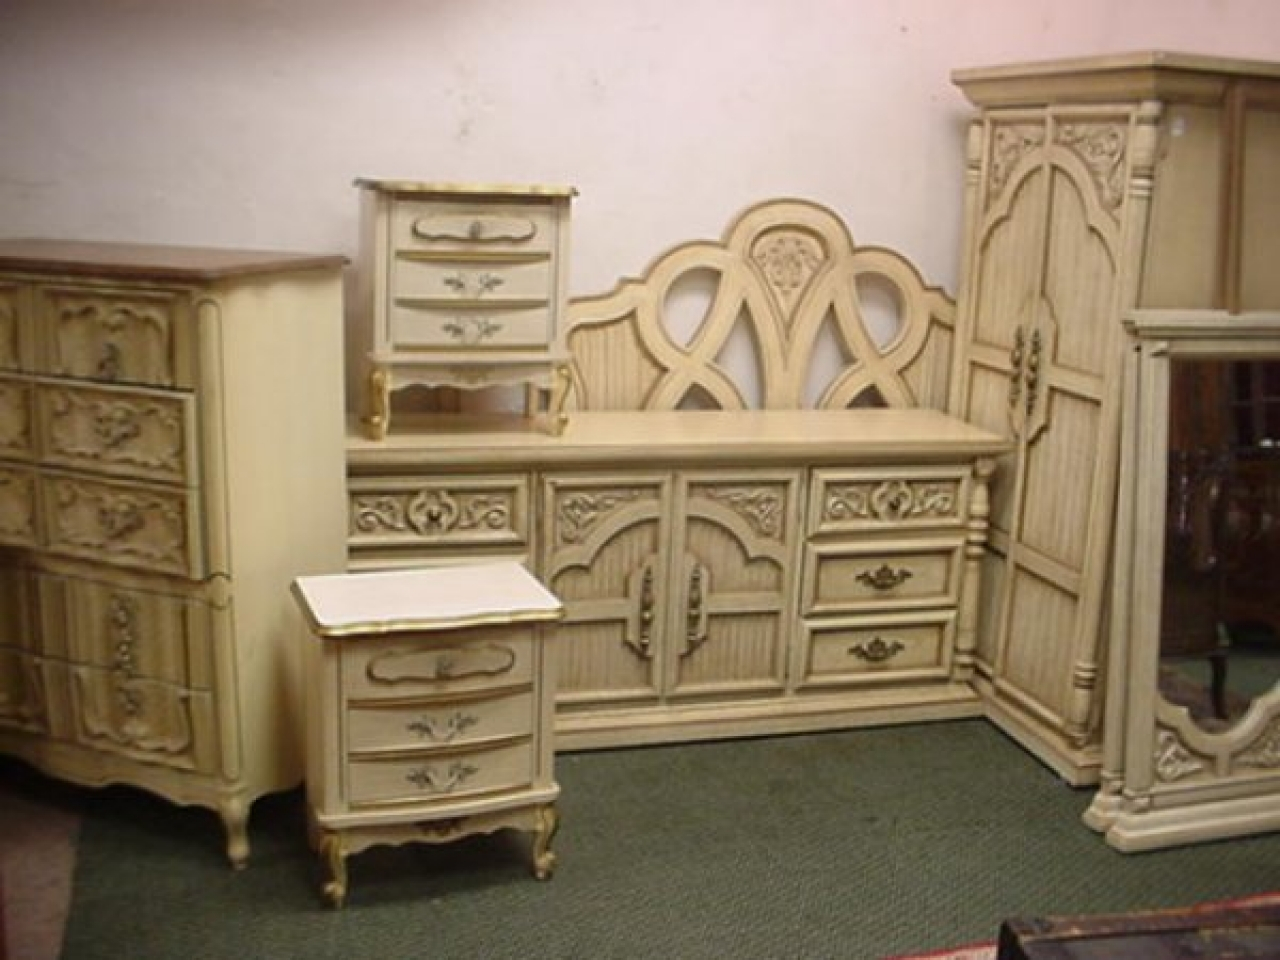 The French Provincial Bedroom Furniture Show Gopher Decorate regarding sizing 1280 X 960